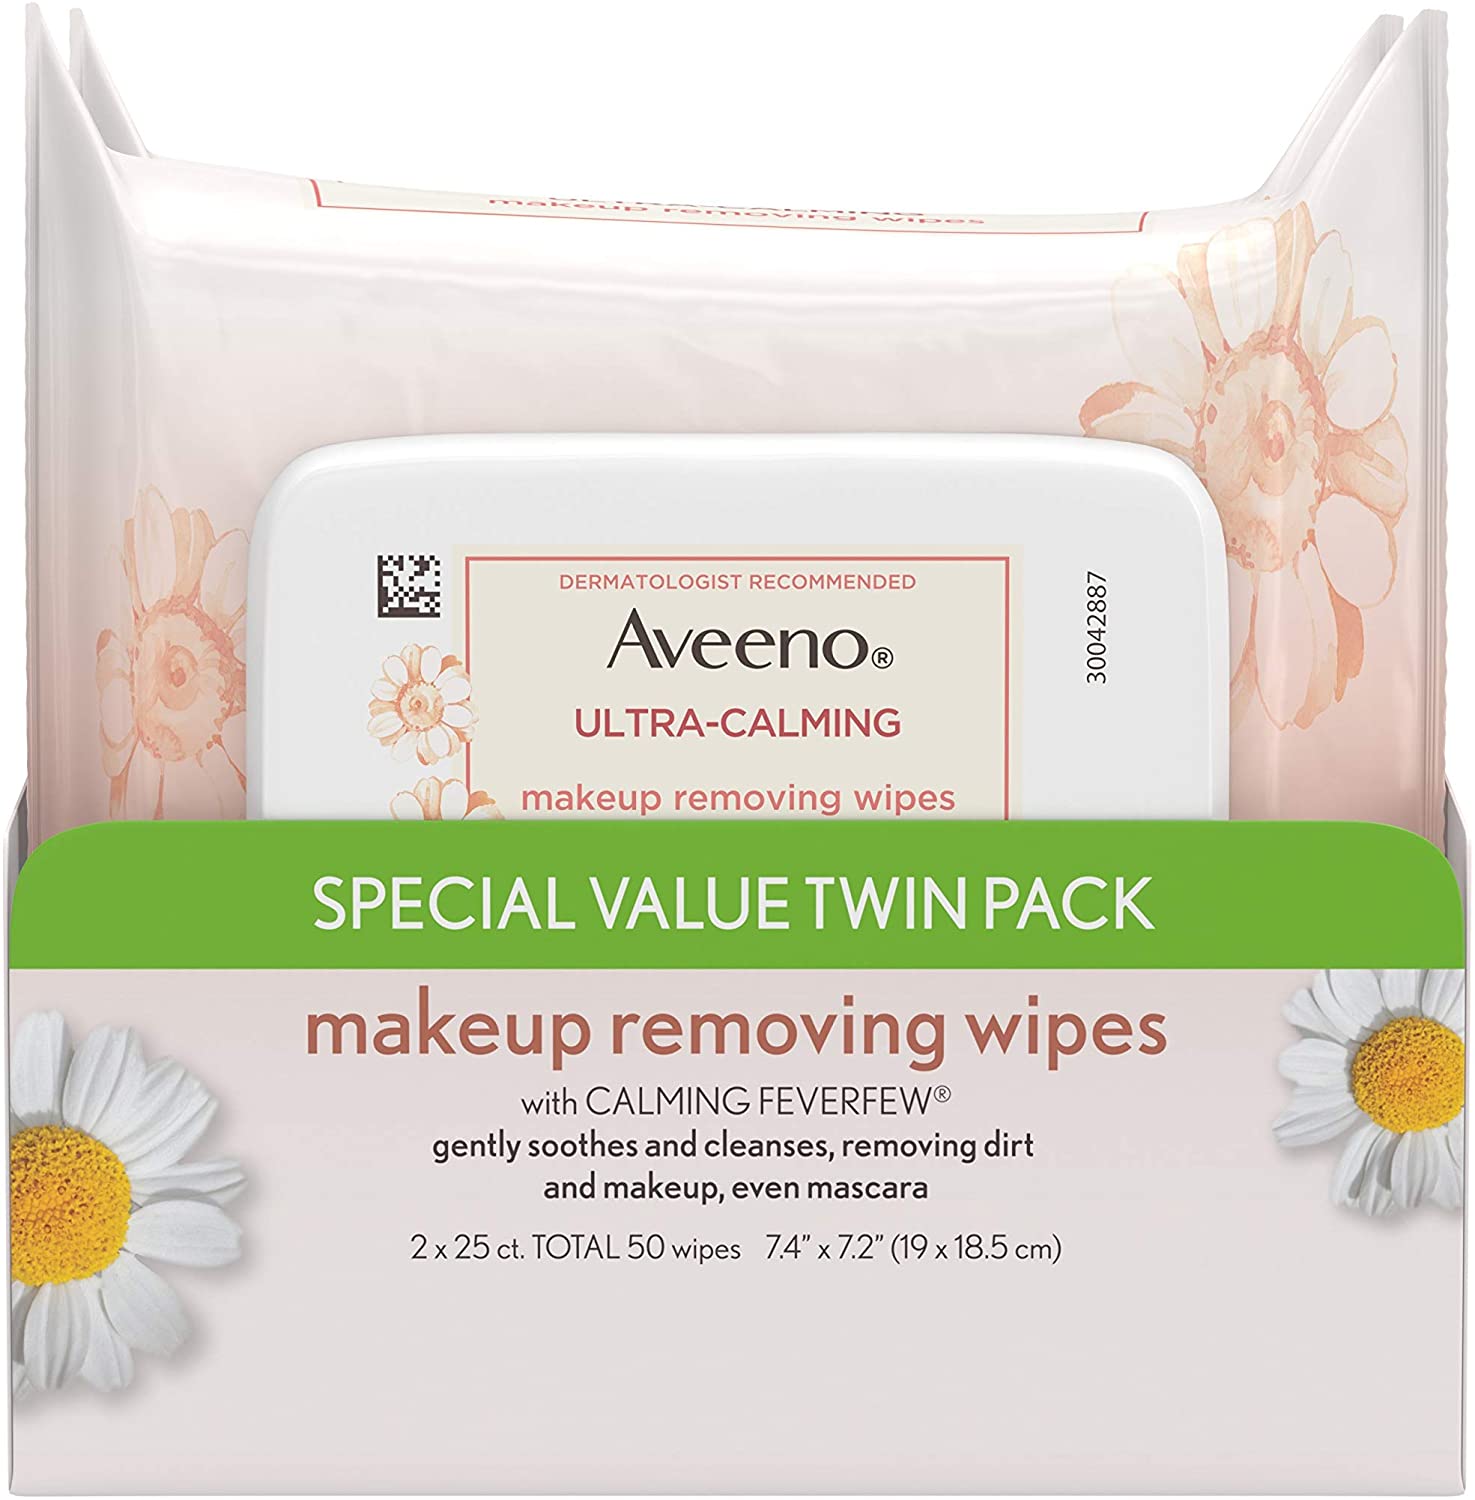 Aveeno Dirt Removing Ultra-Calming Face Wipes, 2-Pack